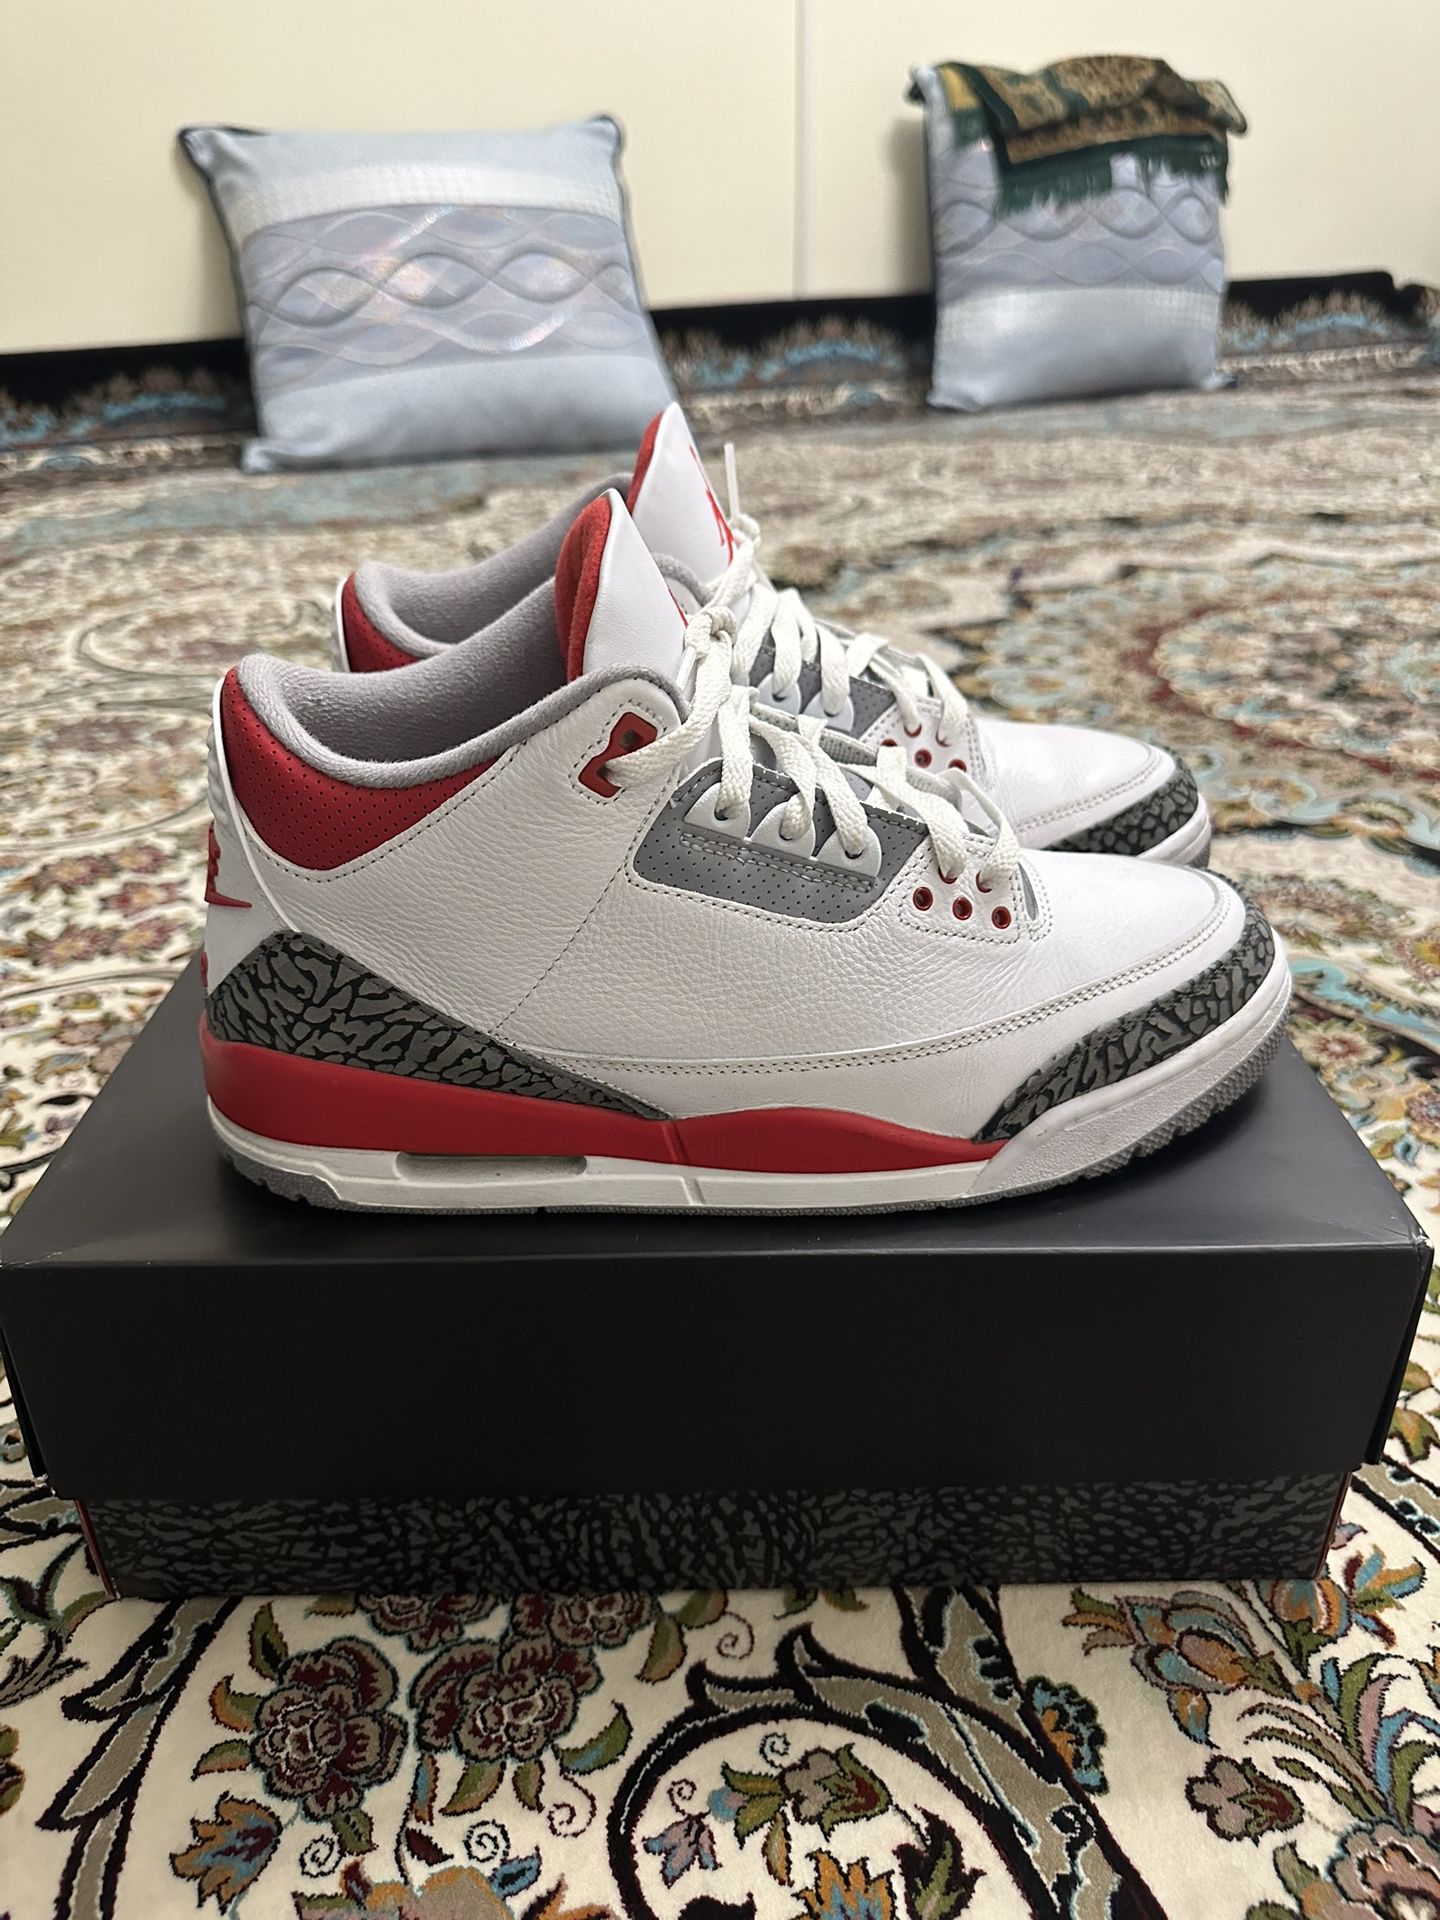 Jordan 3 Palomino for Sale in The Bronx, NY - OfferUp